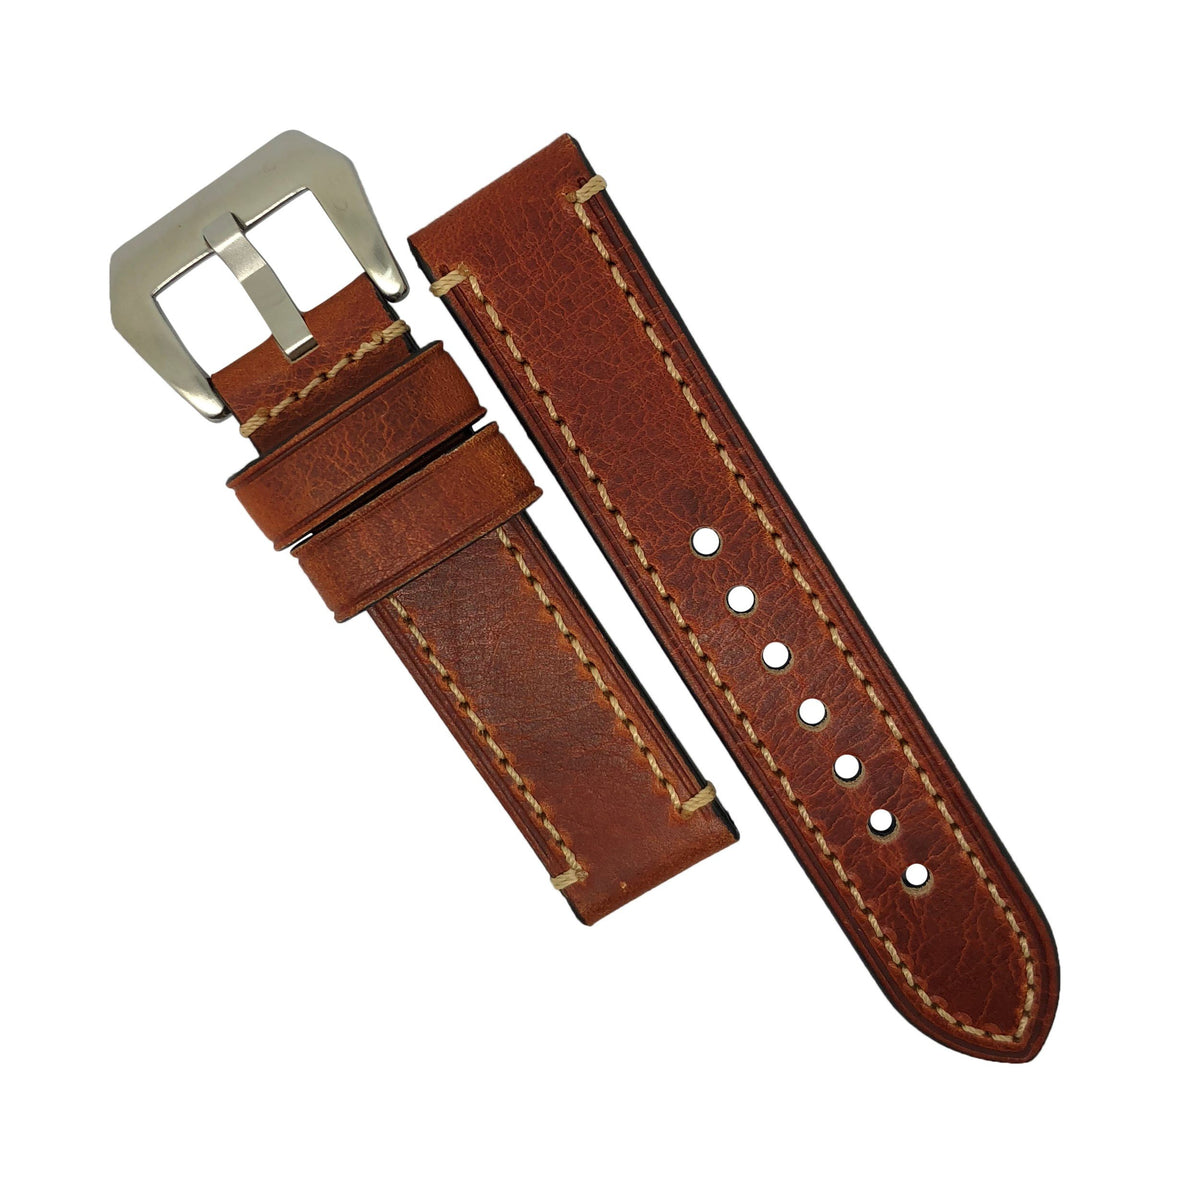 M1 Vintage Leather Watch Strap in Amber with Pre-V Silver Buckle (20mm) - Nomad watch Works